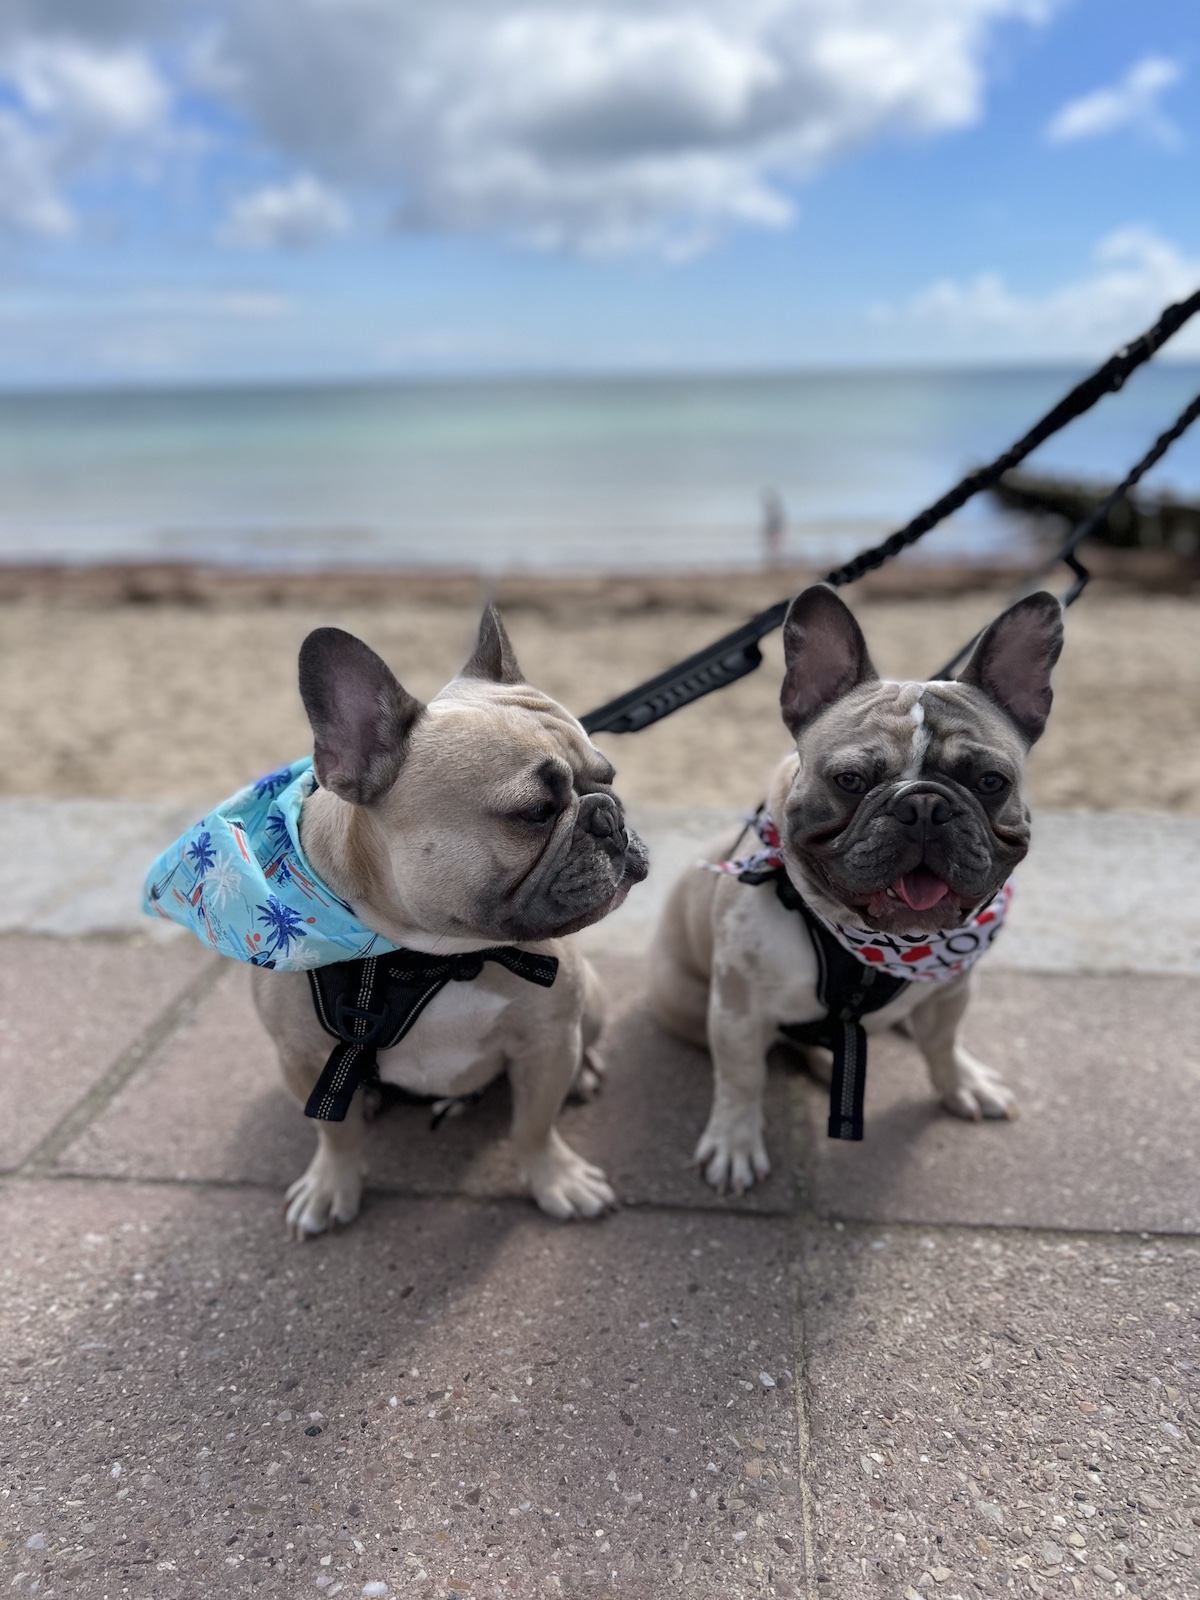 The boys at Bournemouth beach